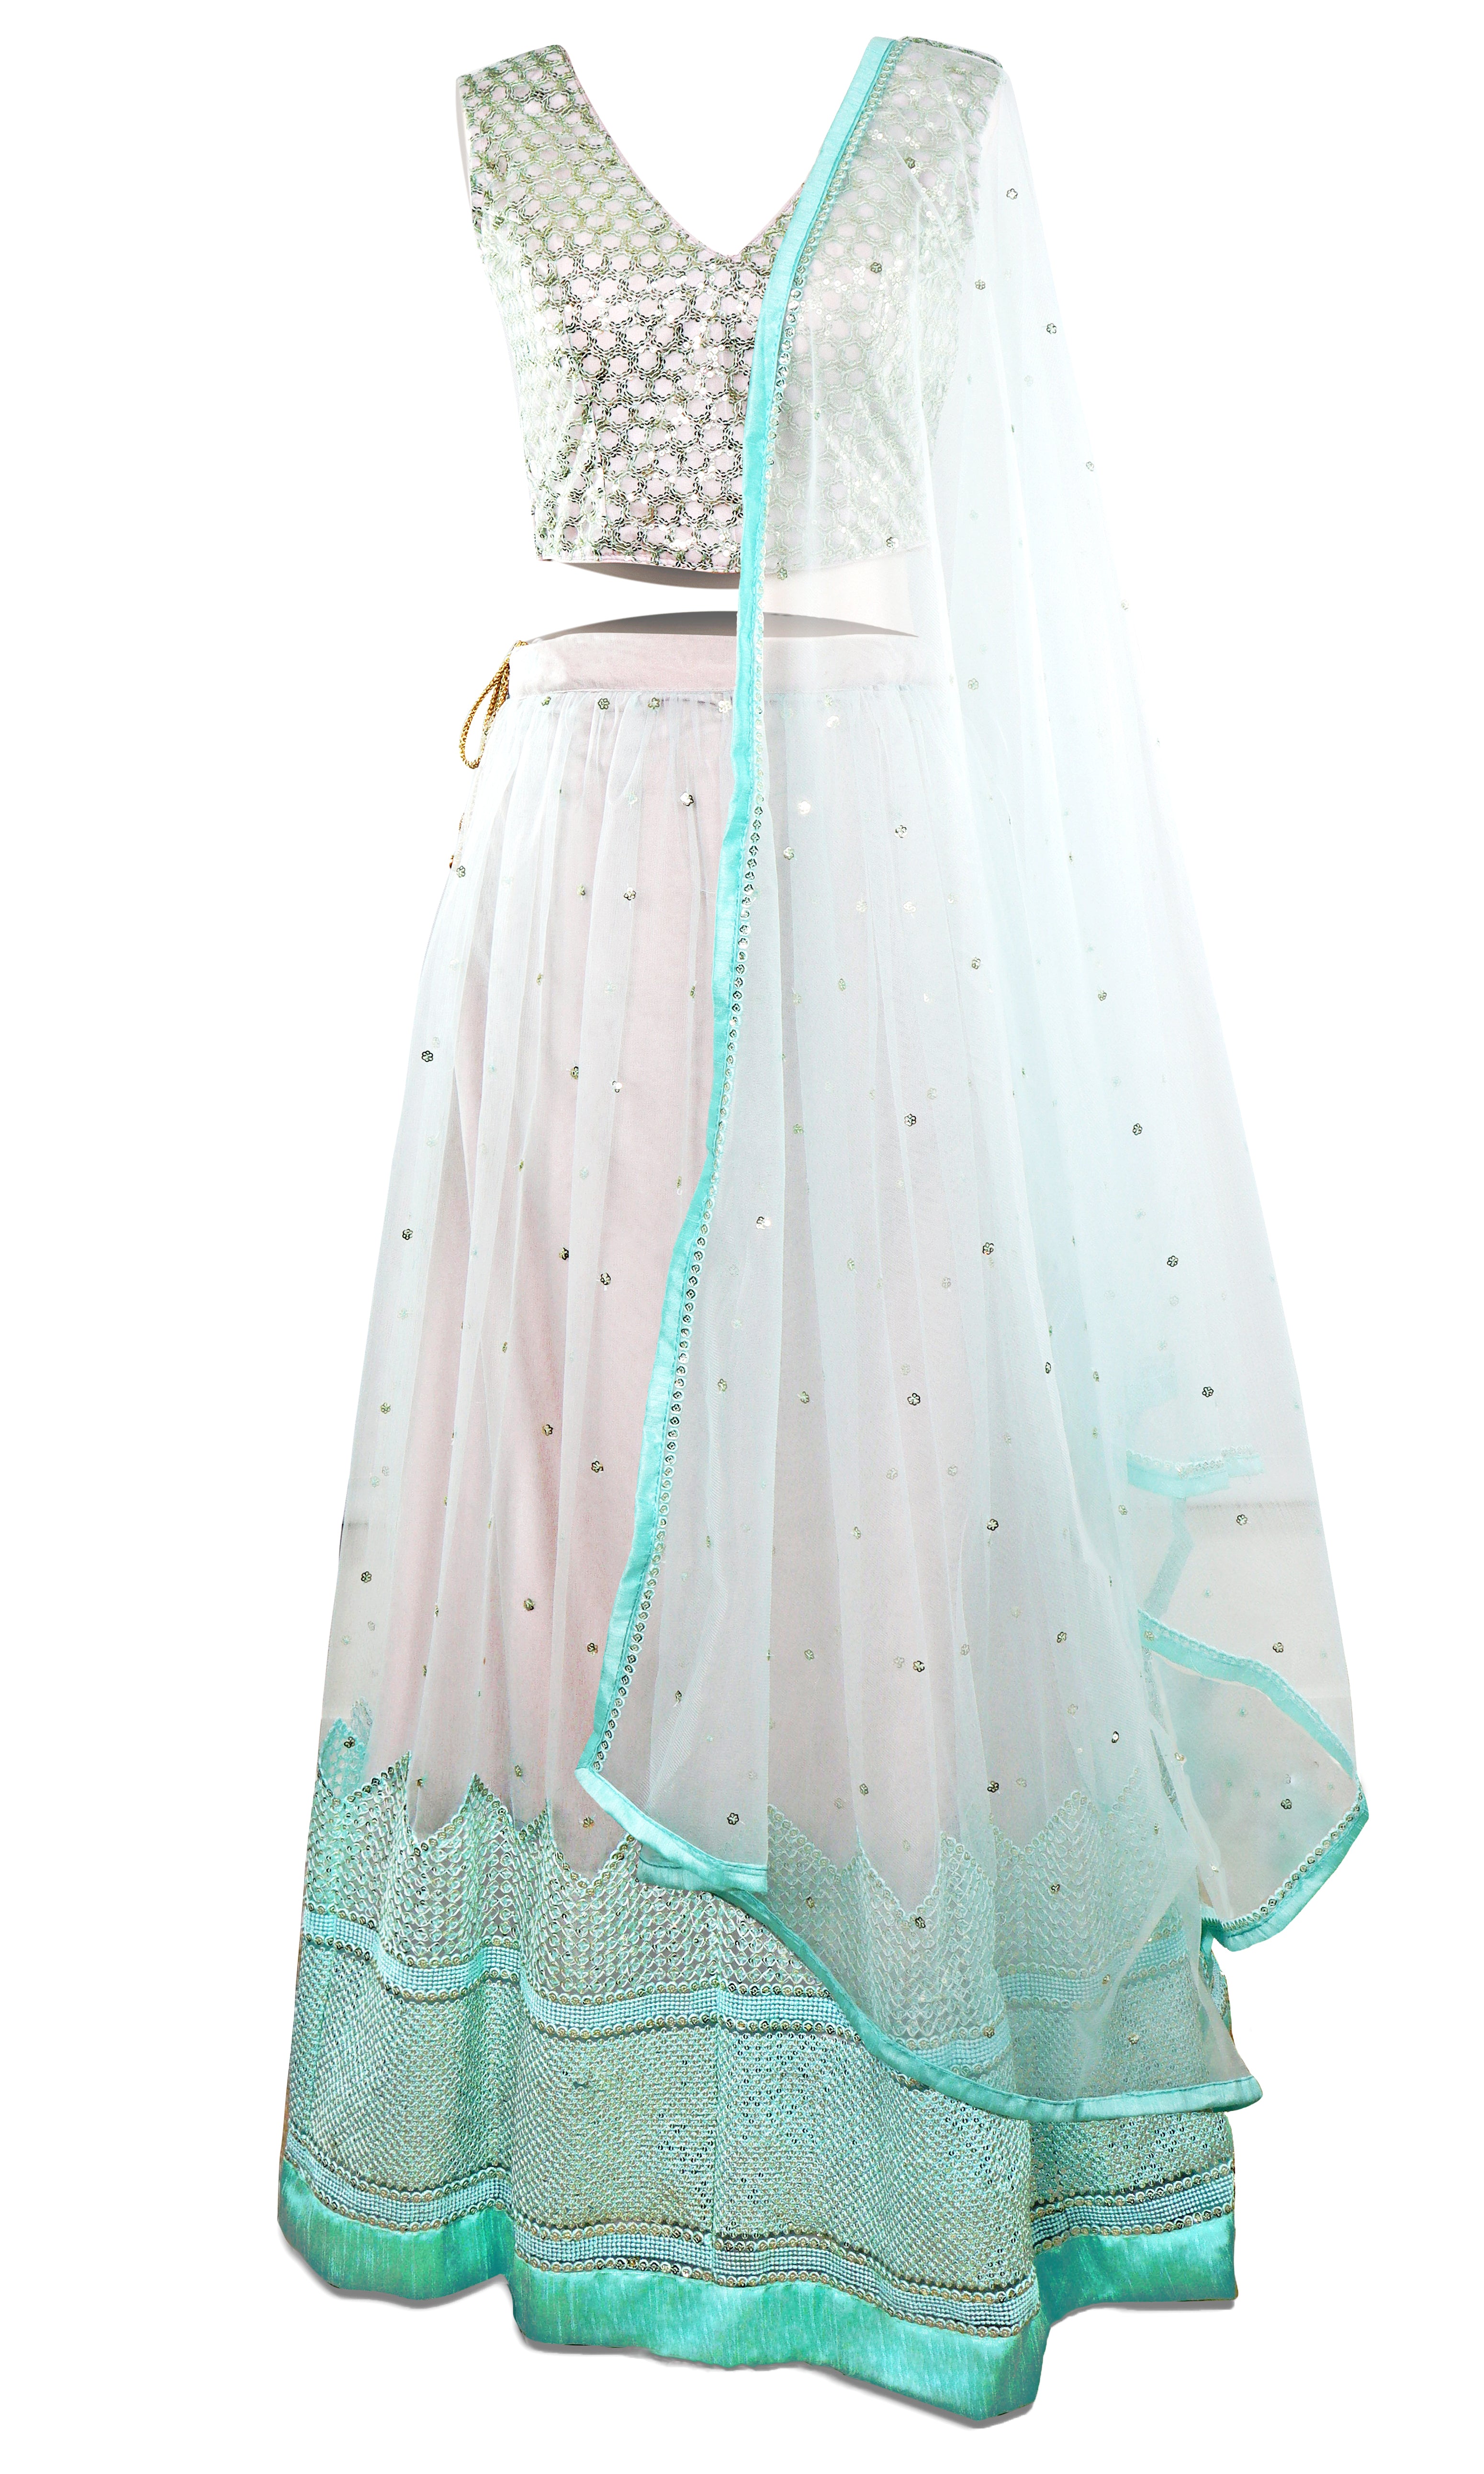  Stunning blue & silver lehenga with the bottom of the skirt is fully covered in bright blue studs and sequins.